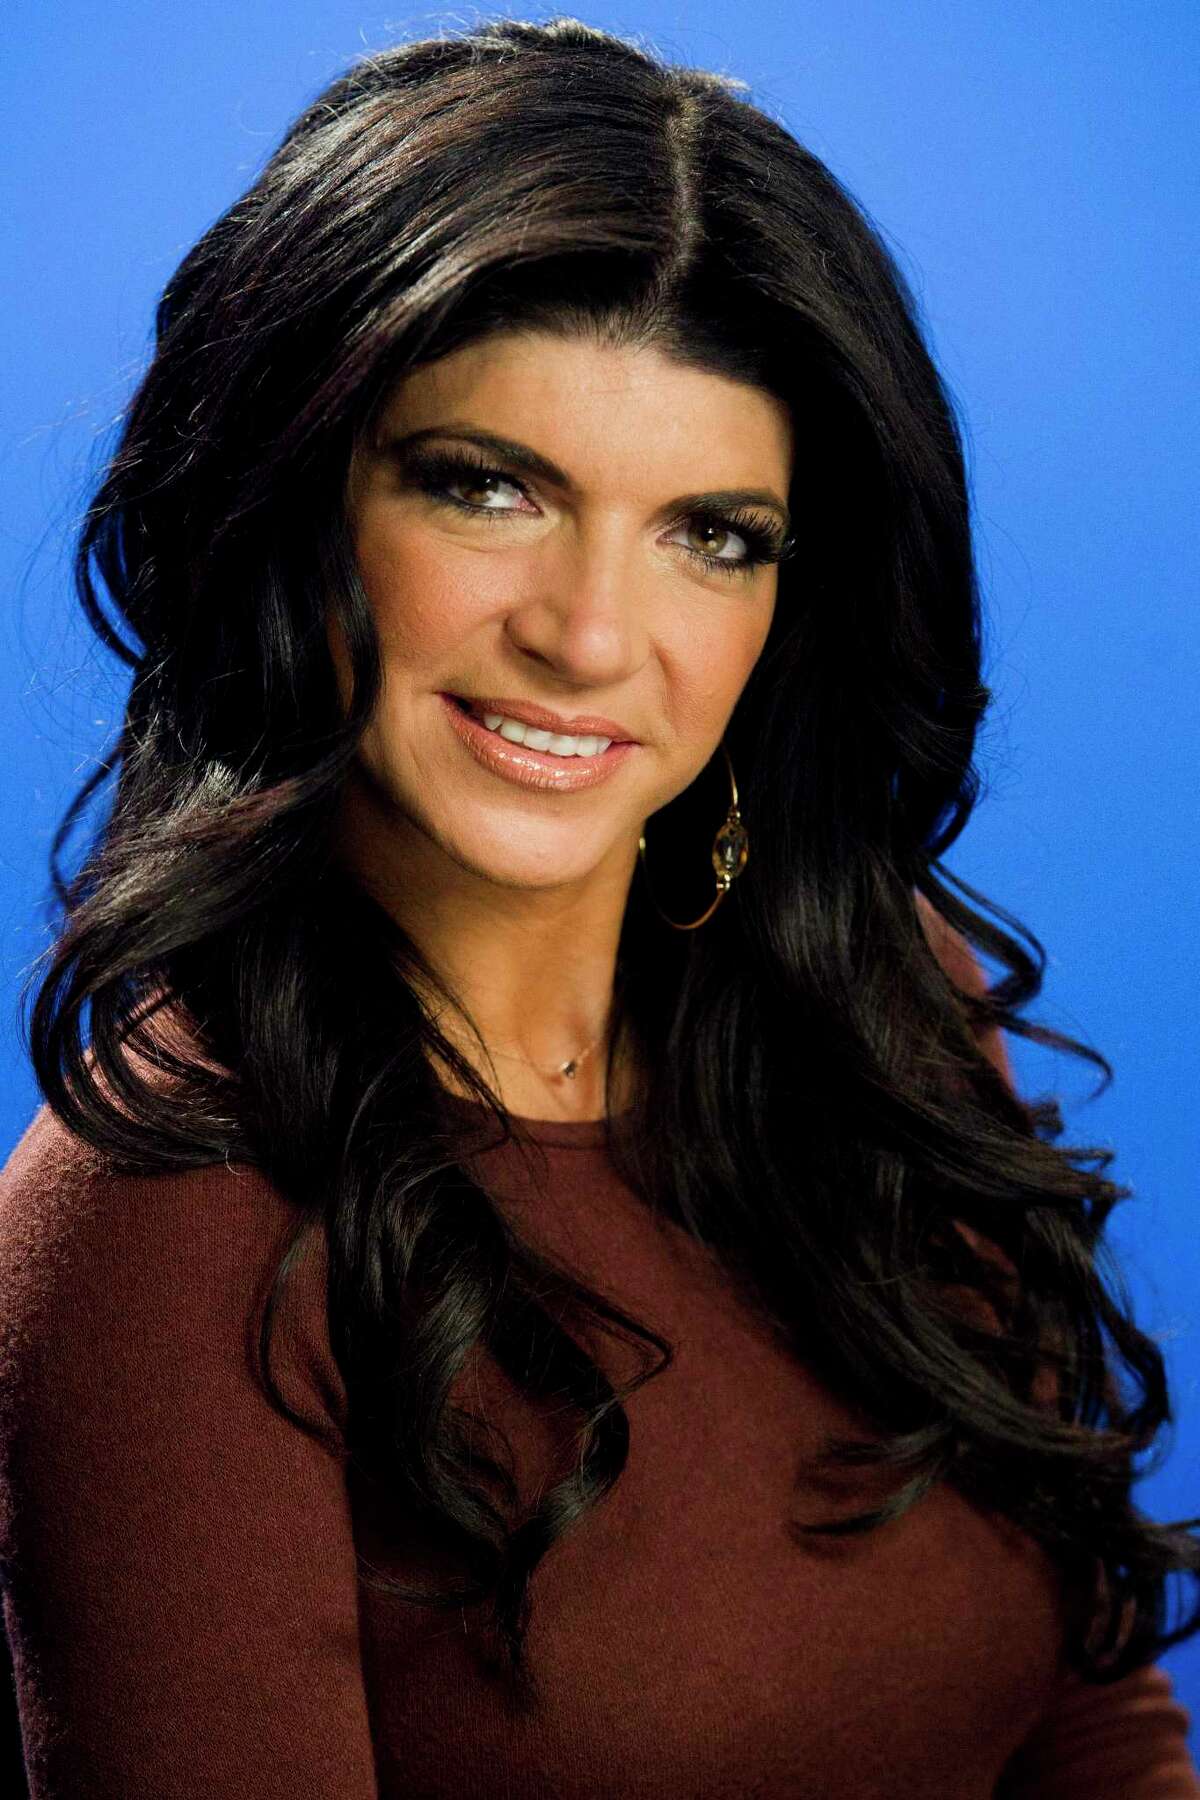 This Jan. 4, 2012 photo shows Teresa Giudice posing for a portrait in New York.